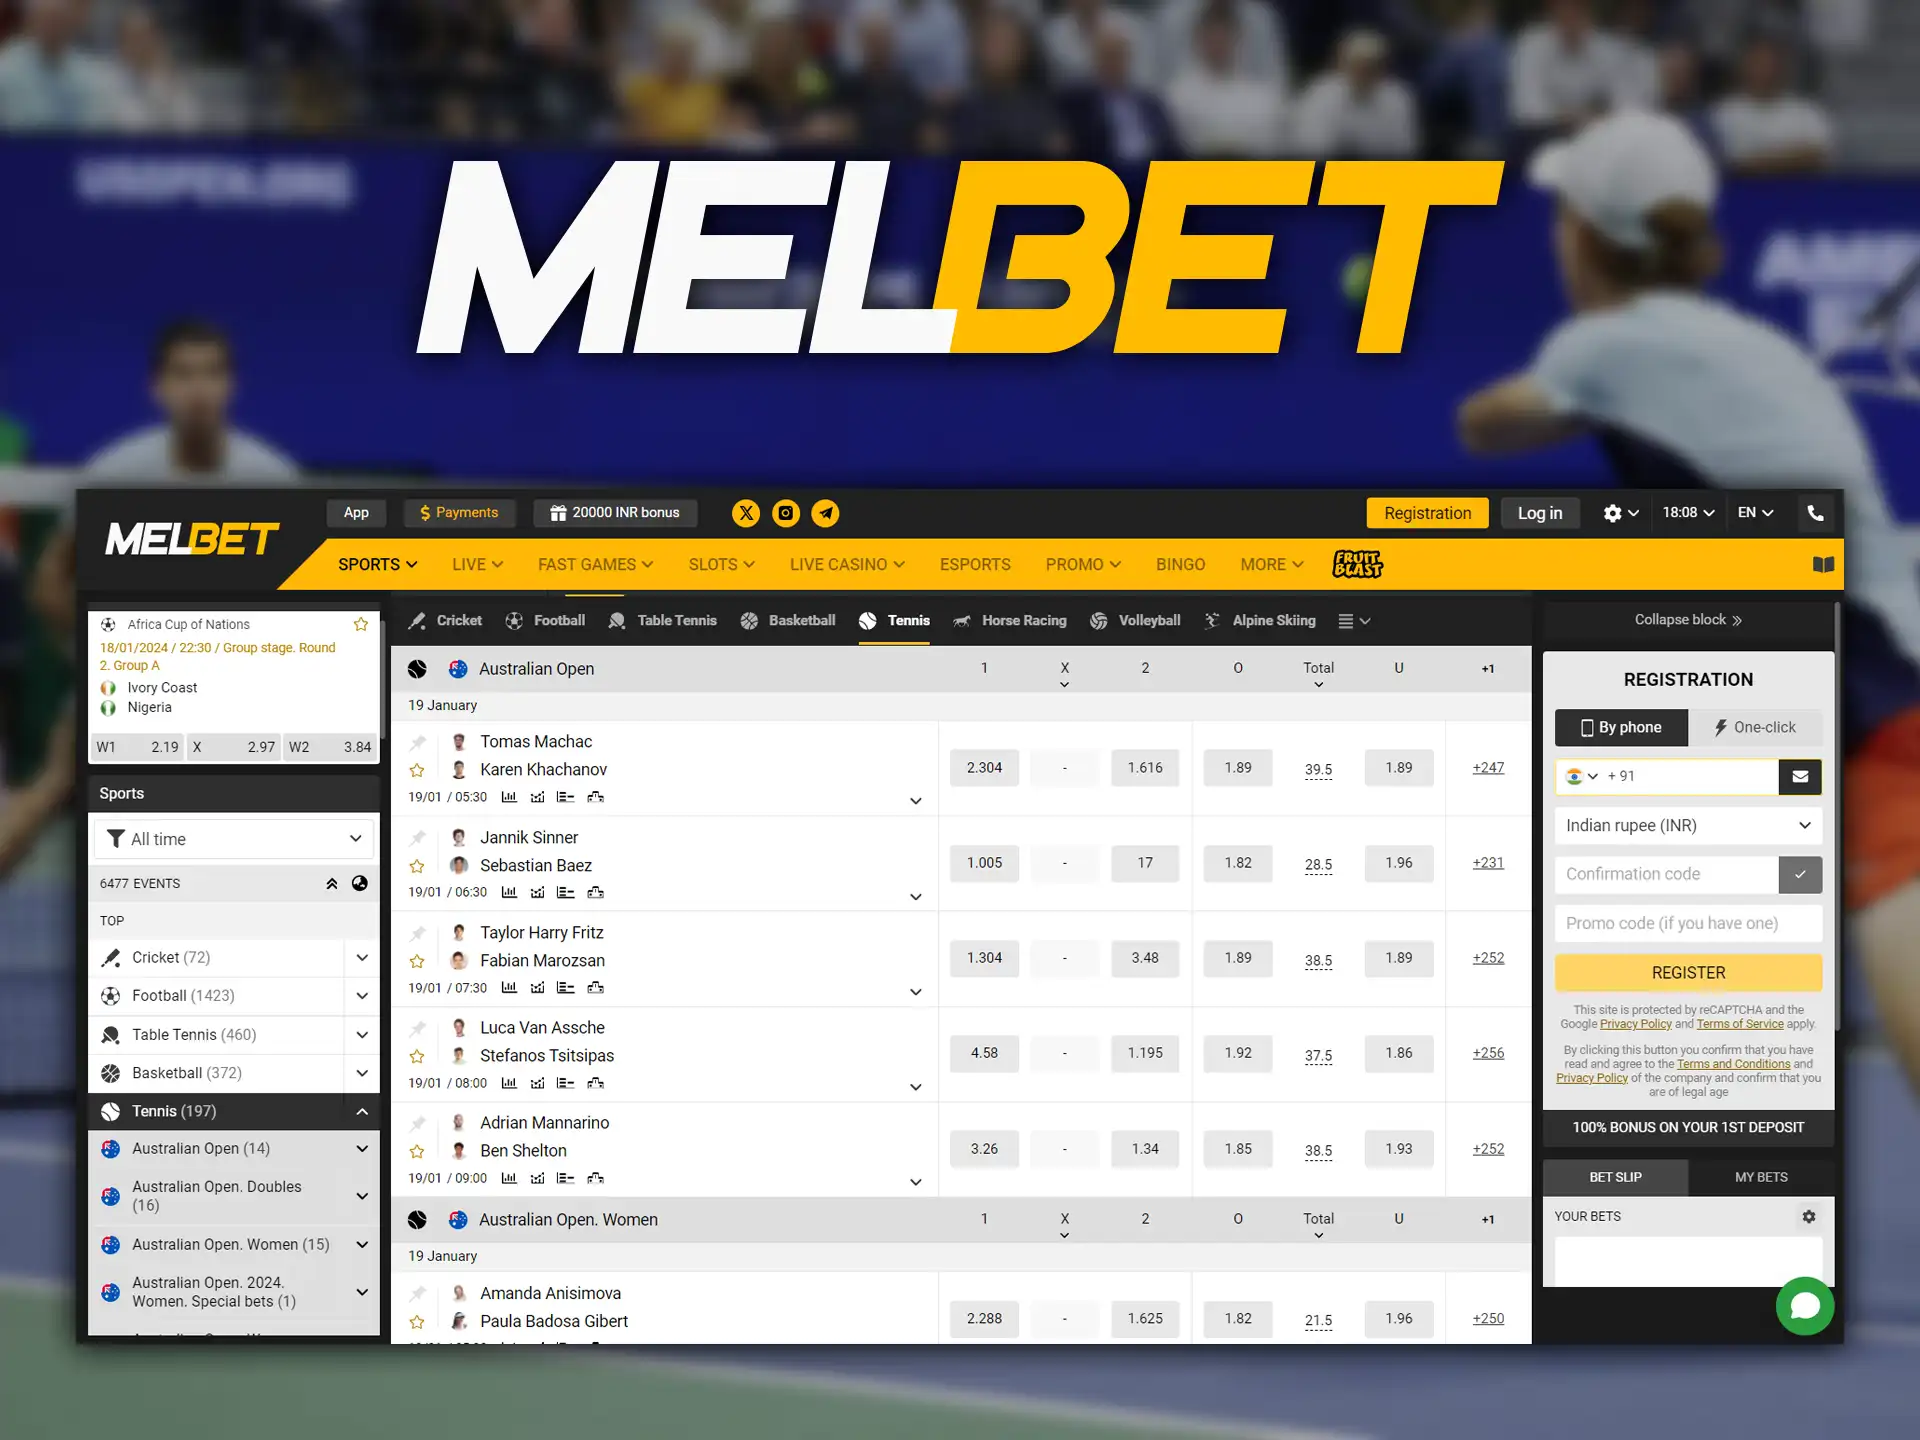 The most favorable offers on tennis betting you will find at the bookmaker Melbet.